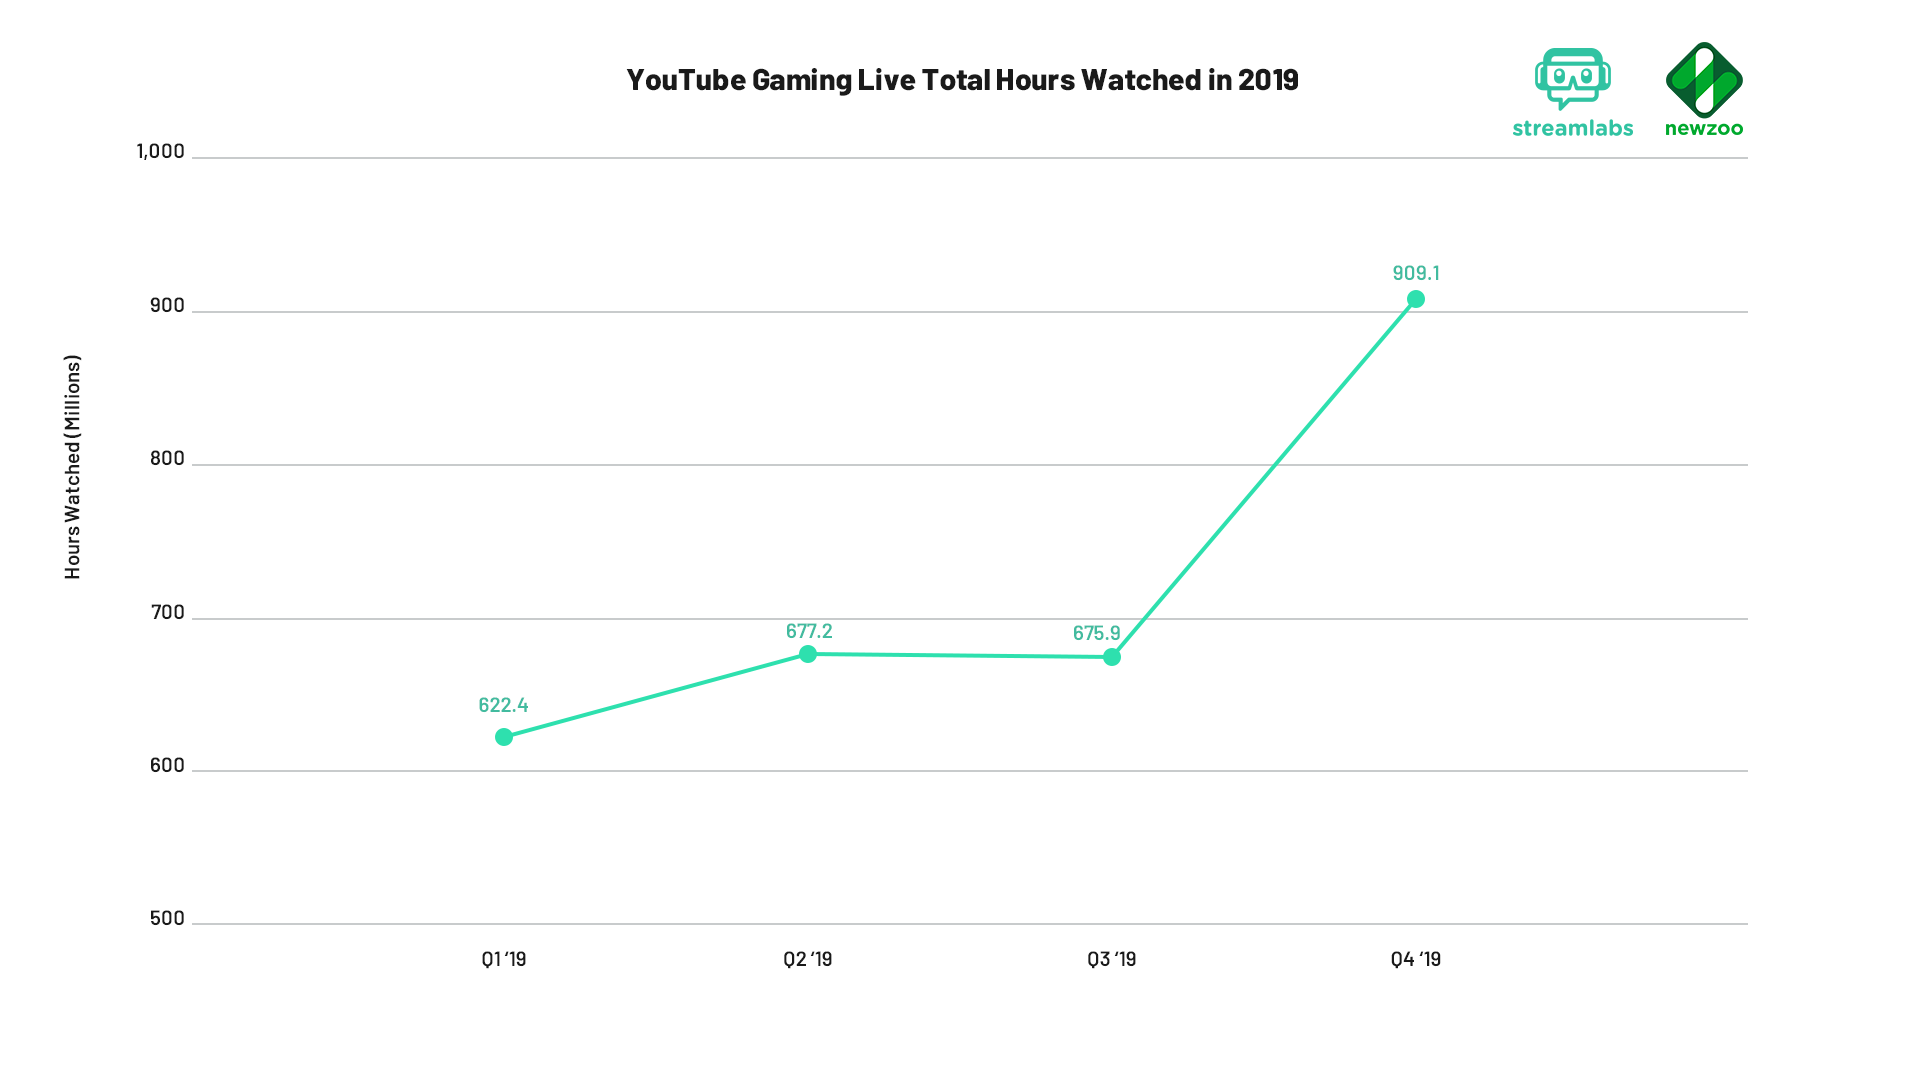 Twitch Feeling the Squeeze of Streaming Wars According to New Data